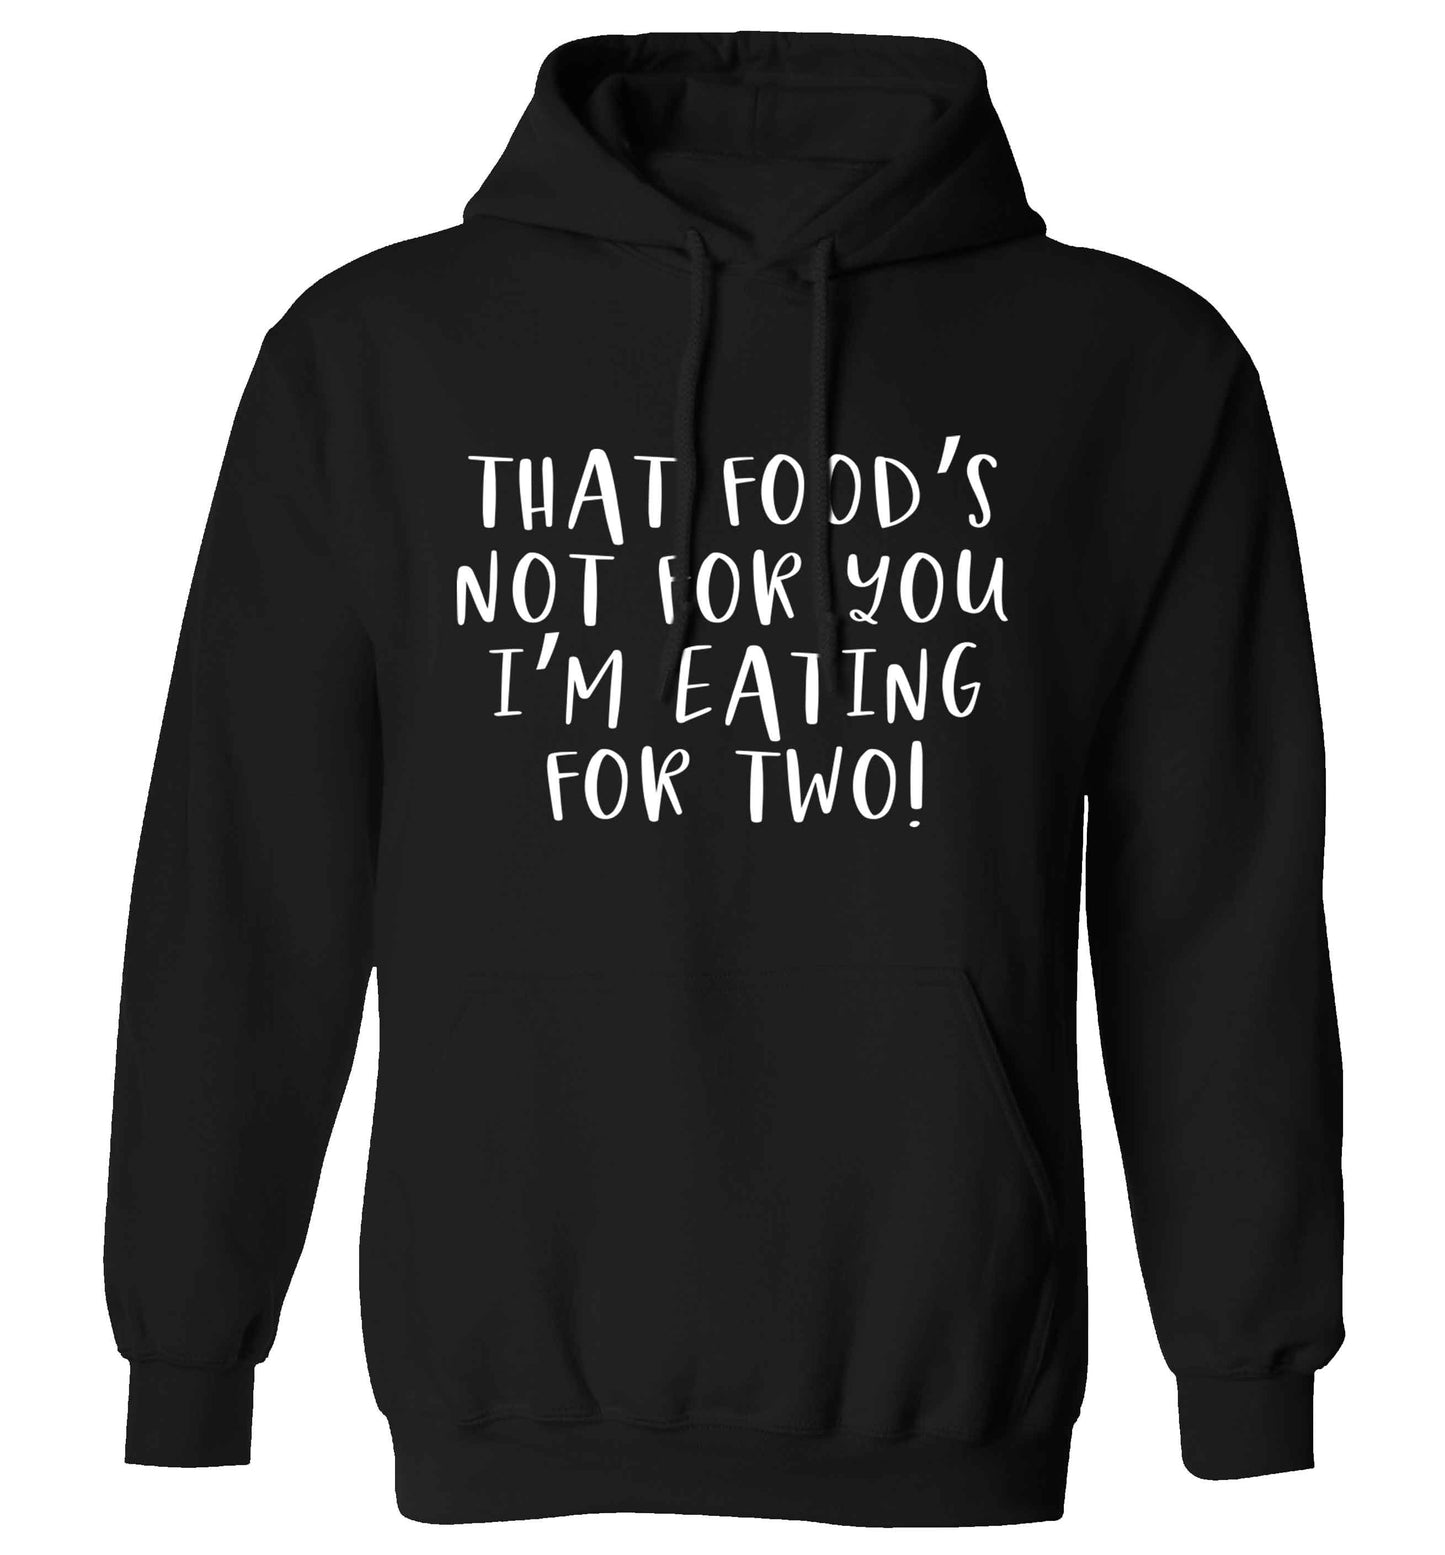 That food's not for you I'm eating for two adults unisex black hoodie 2XL